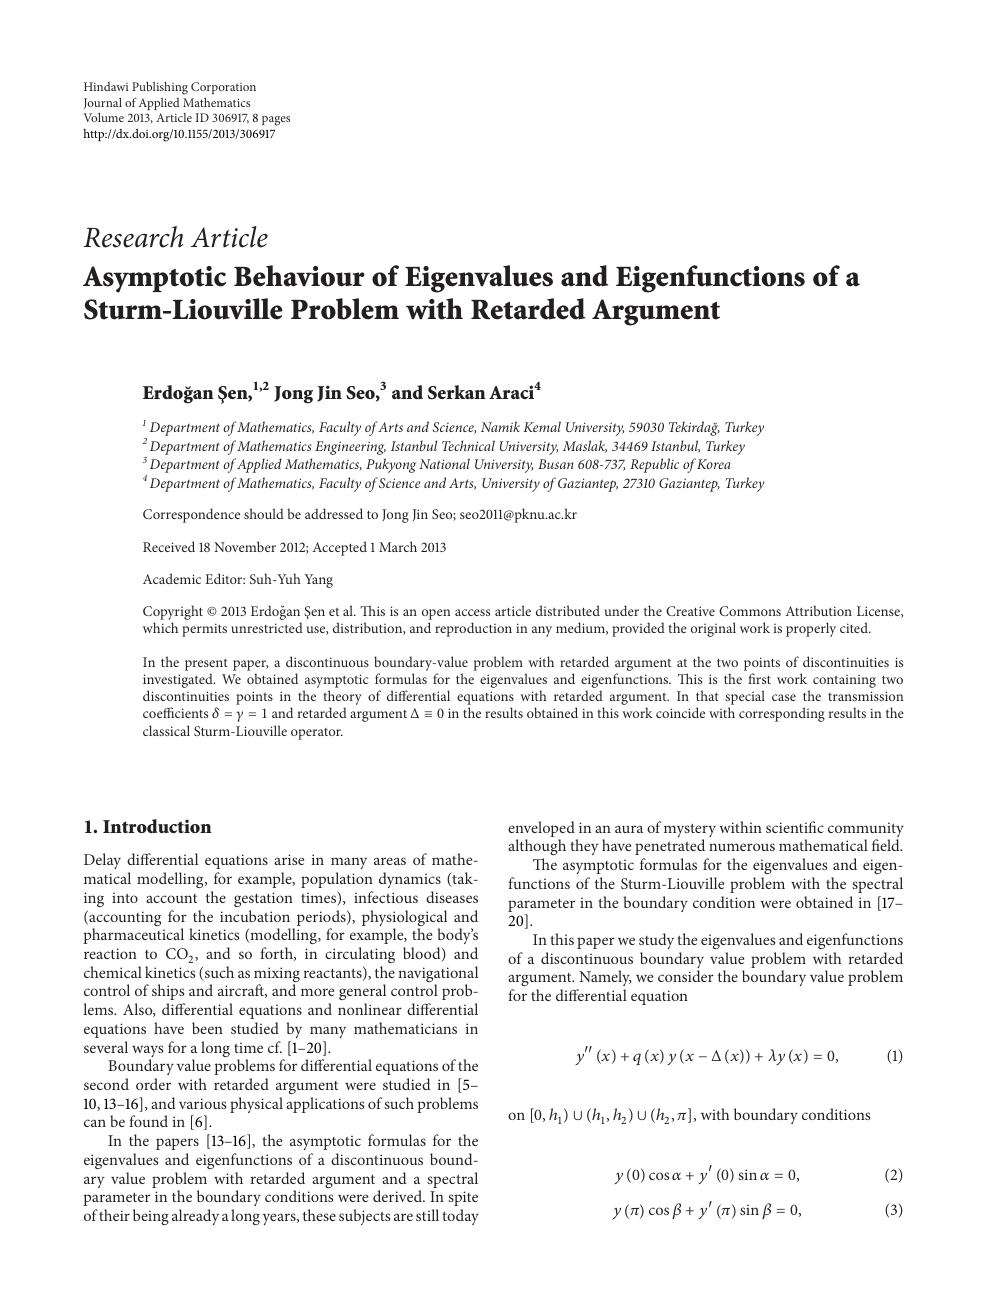 Asymptotic Behaviour Of Eigenvalues And Eigenfunctions Of A Sturm Liouville Problem With Retarded Argument Topic Of Research Paper In Mathematics Download Scholarly Article Pdf And Read For Free On Cyberleninka Open Science